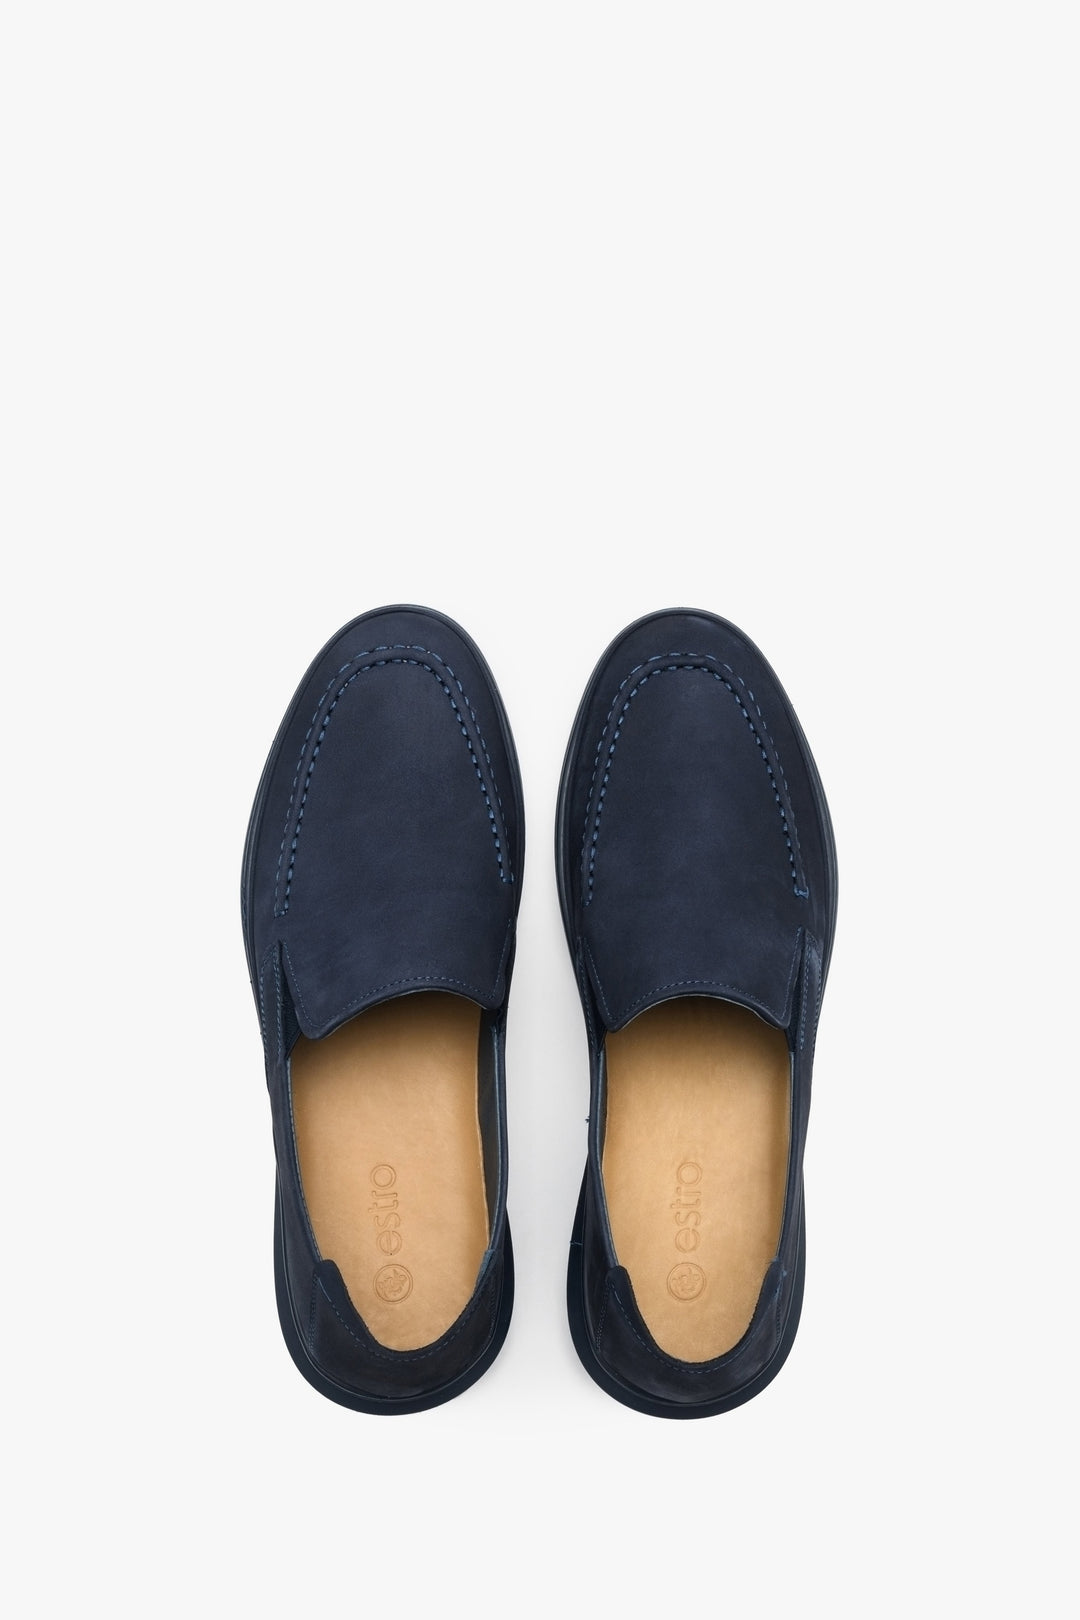 Men's Estro moccasins in dark blue - close-up on the upper part of the shoe.